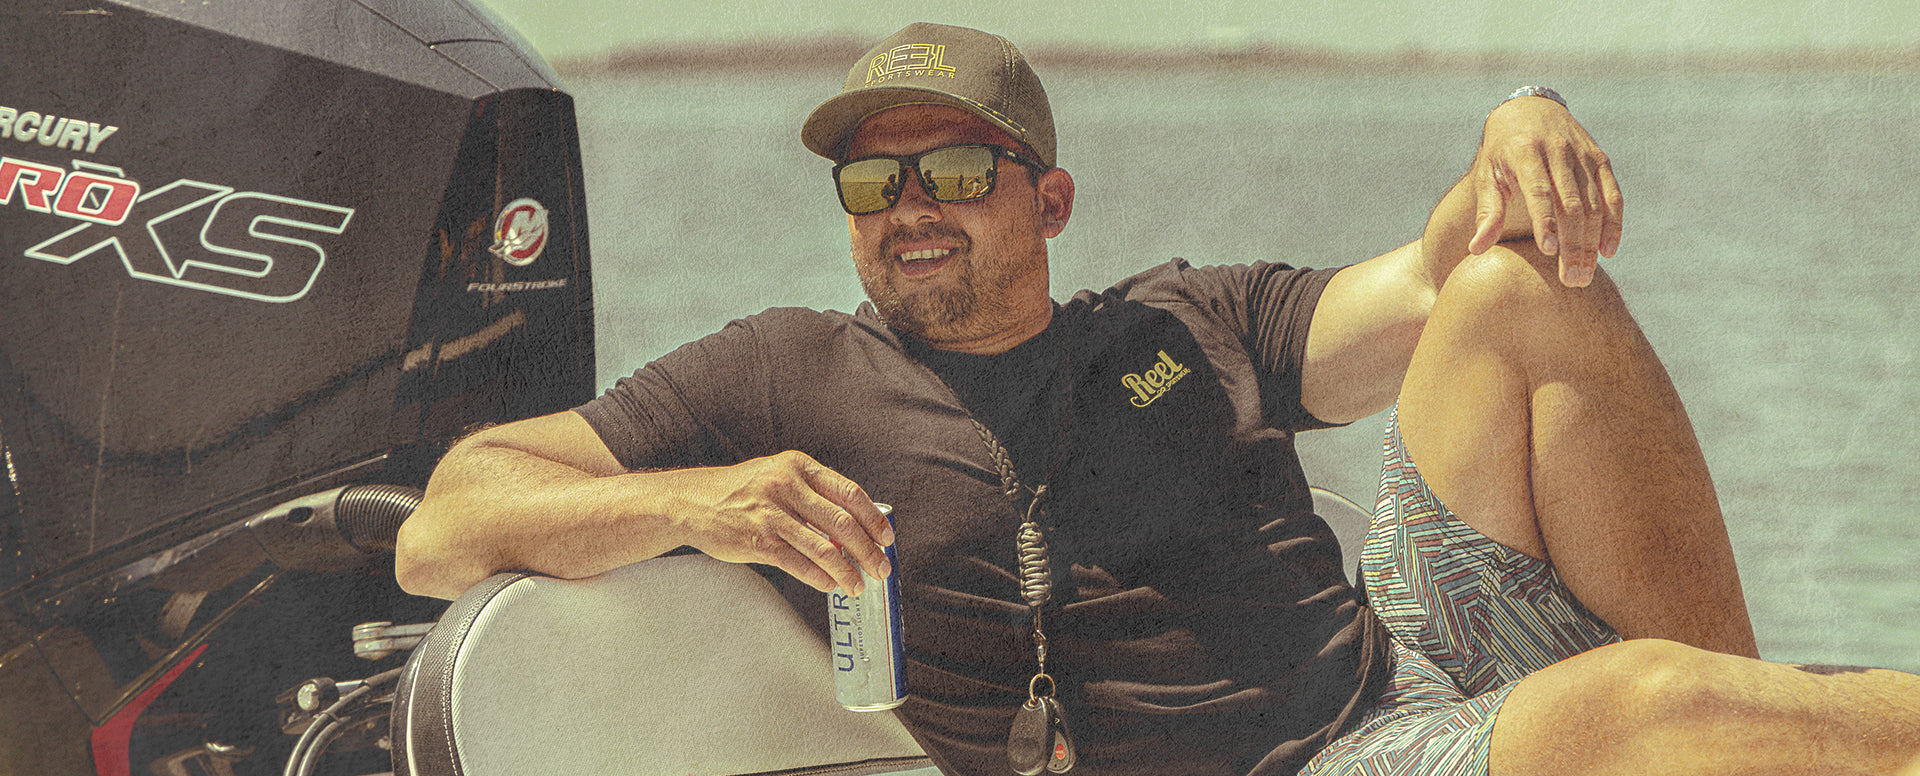 Jeremey Torres chillin on the deck of a boat with a beer and Reel Sportswear